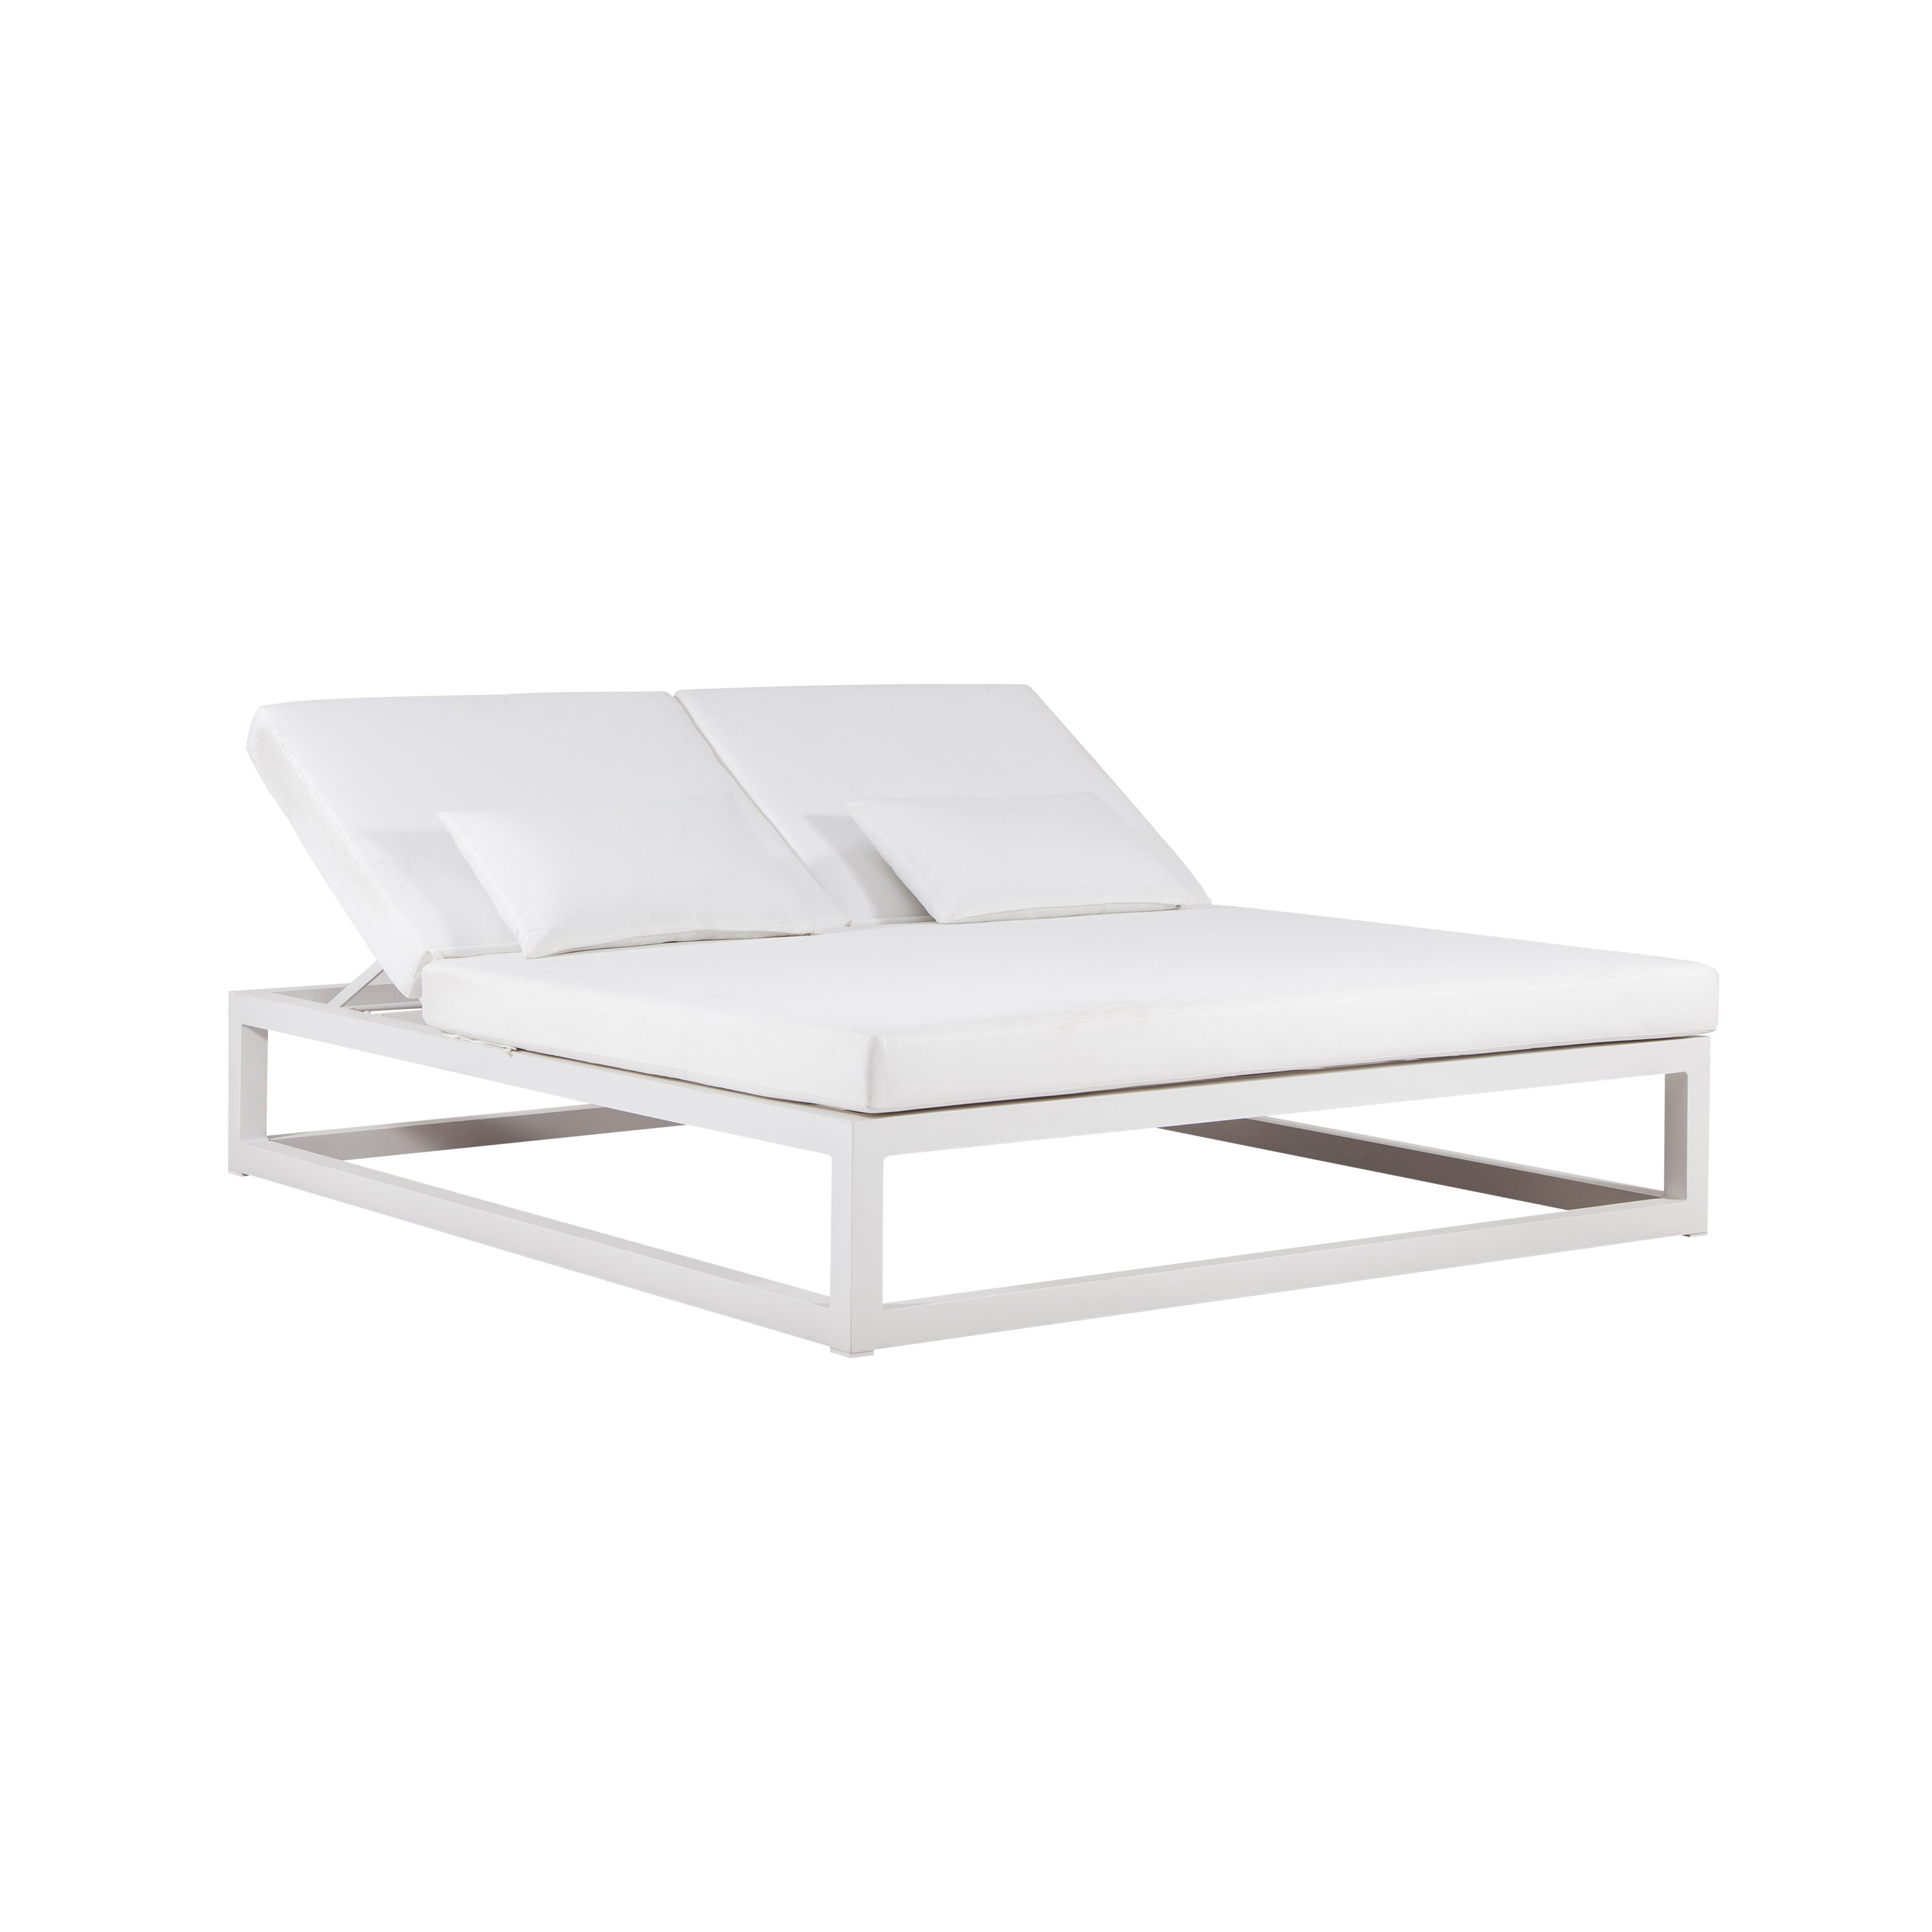 Reen alu.duebel daybed Featured Image